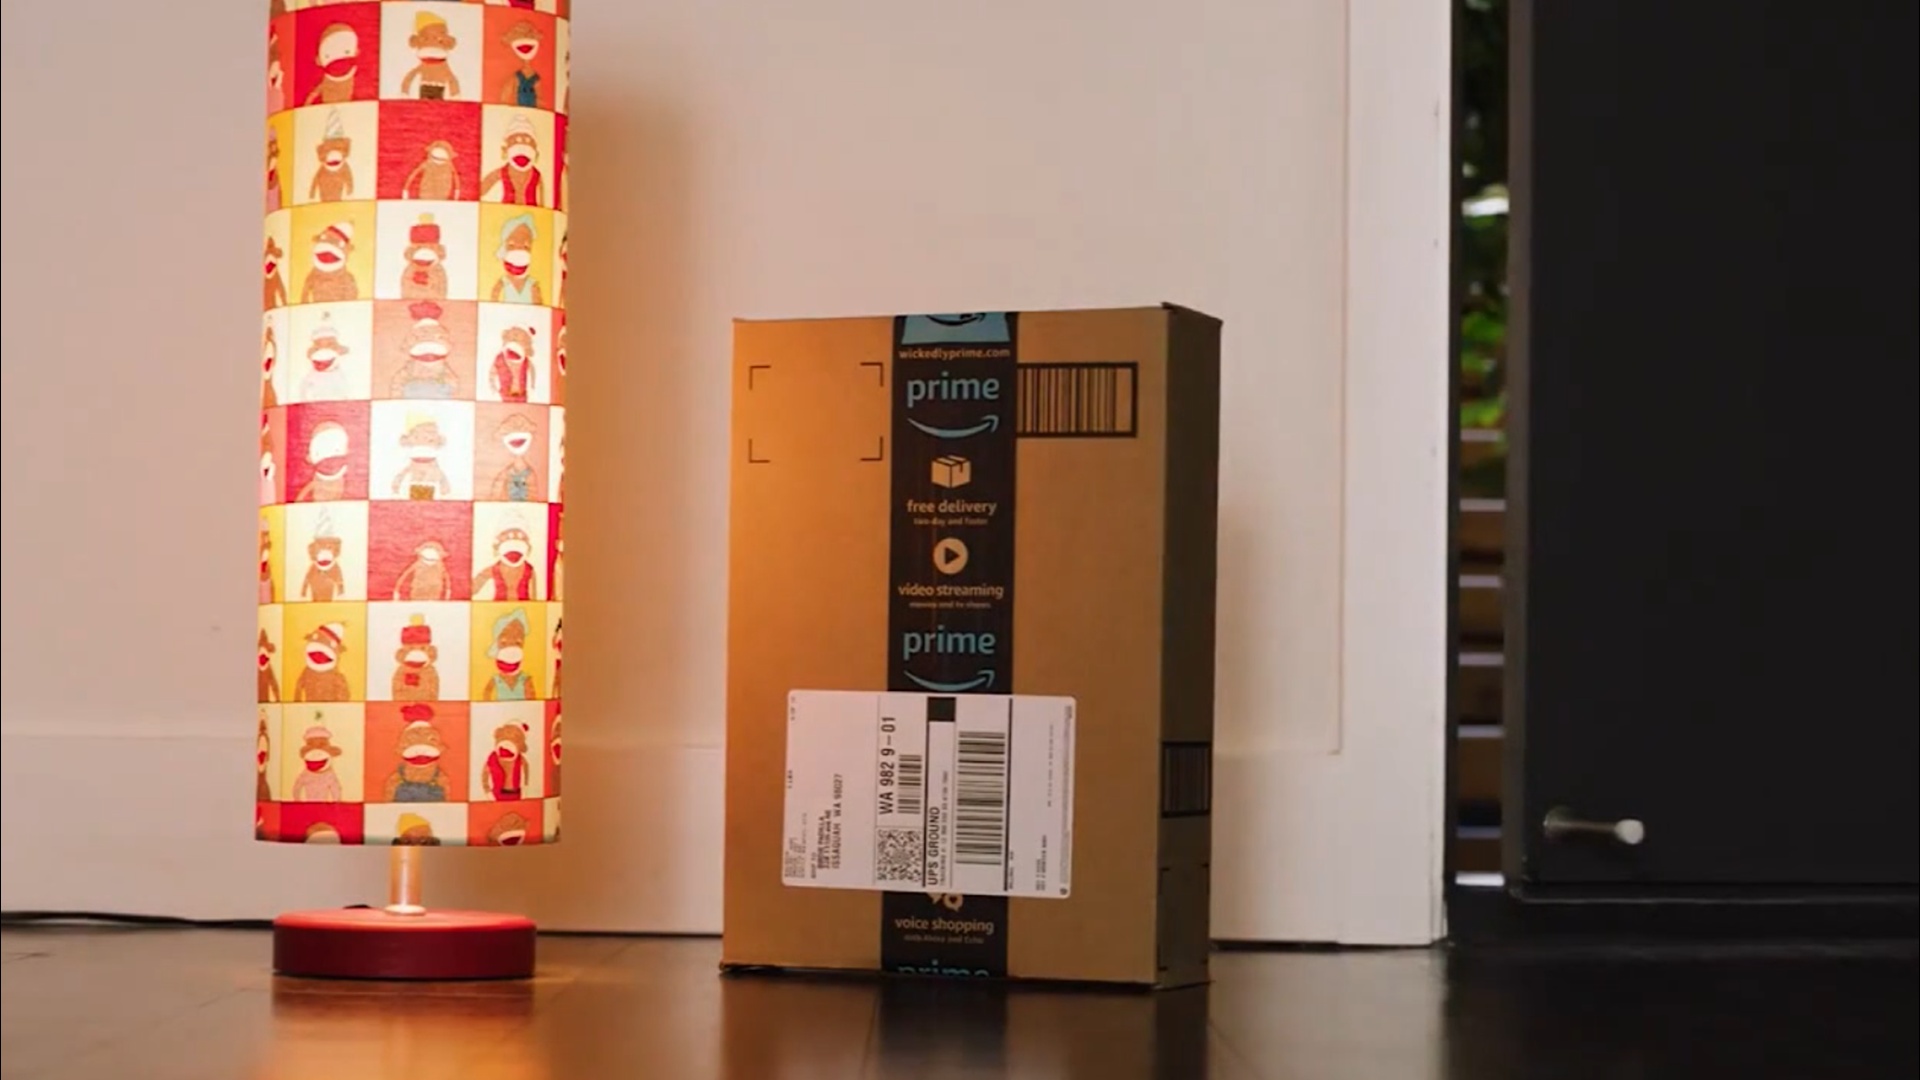 An Amazon program allows delivery drivers to unlock buildings with a mobile device. But the program may stir security concerns amid the rise of cyber attacks.